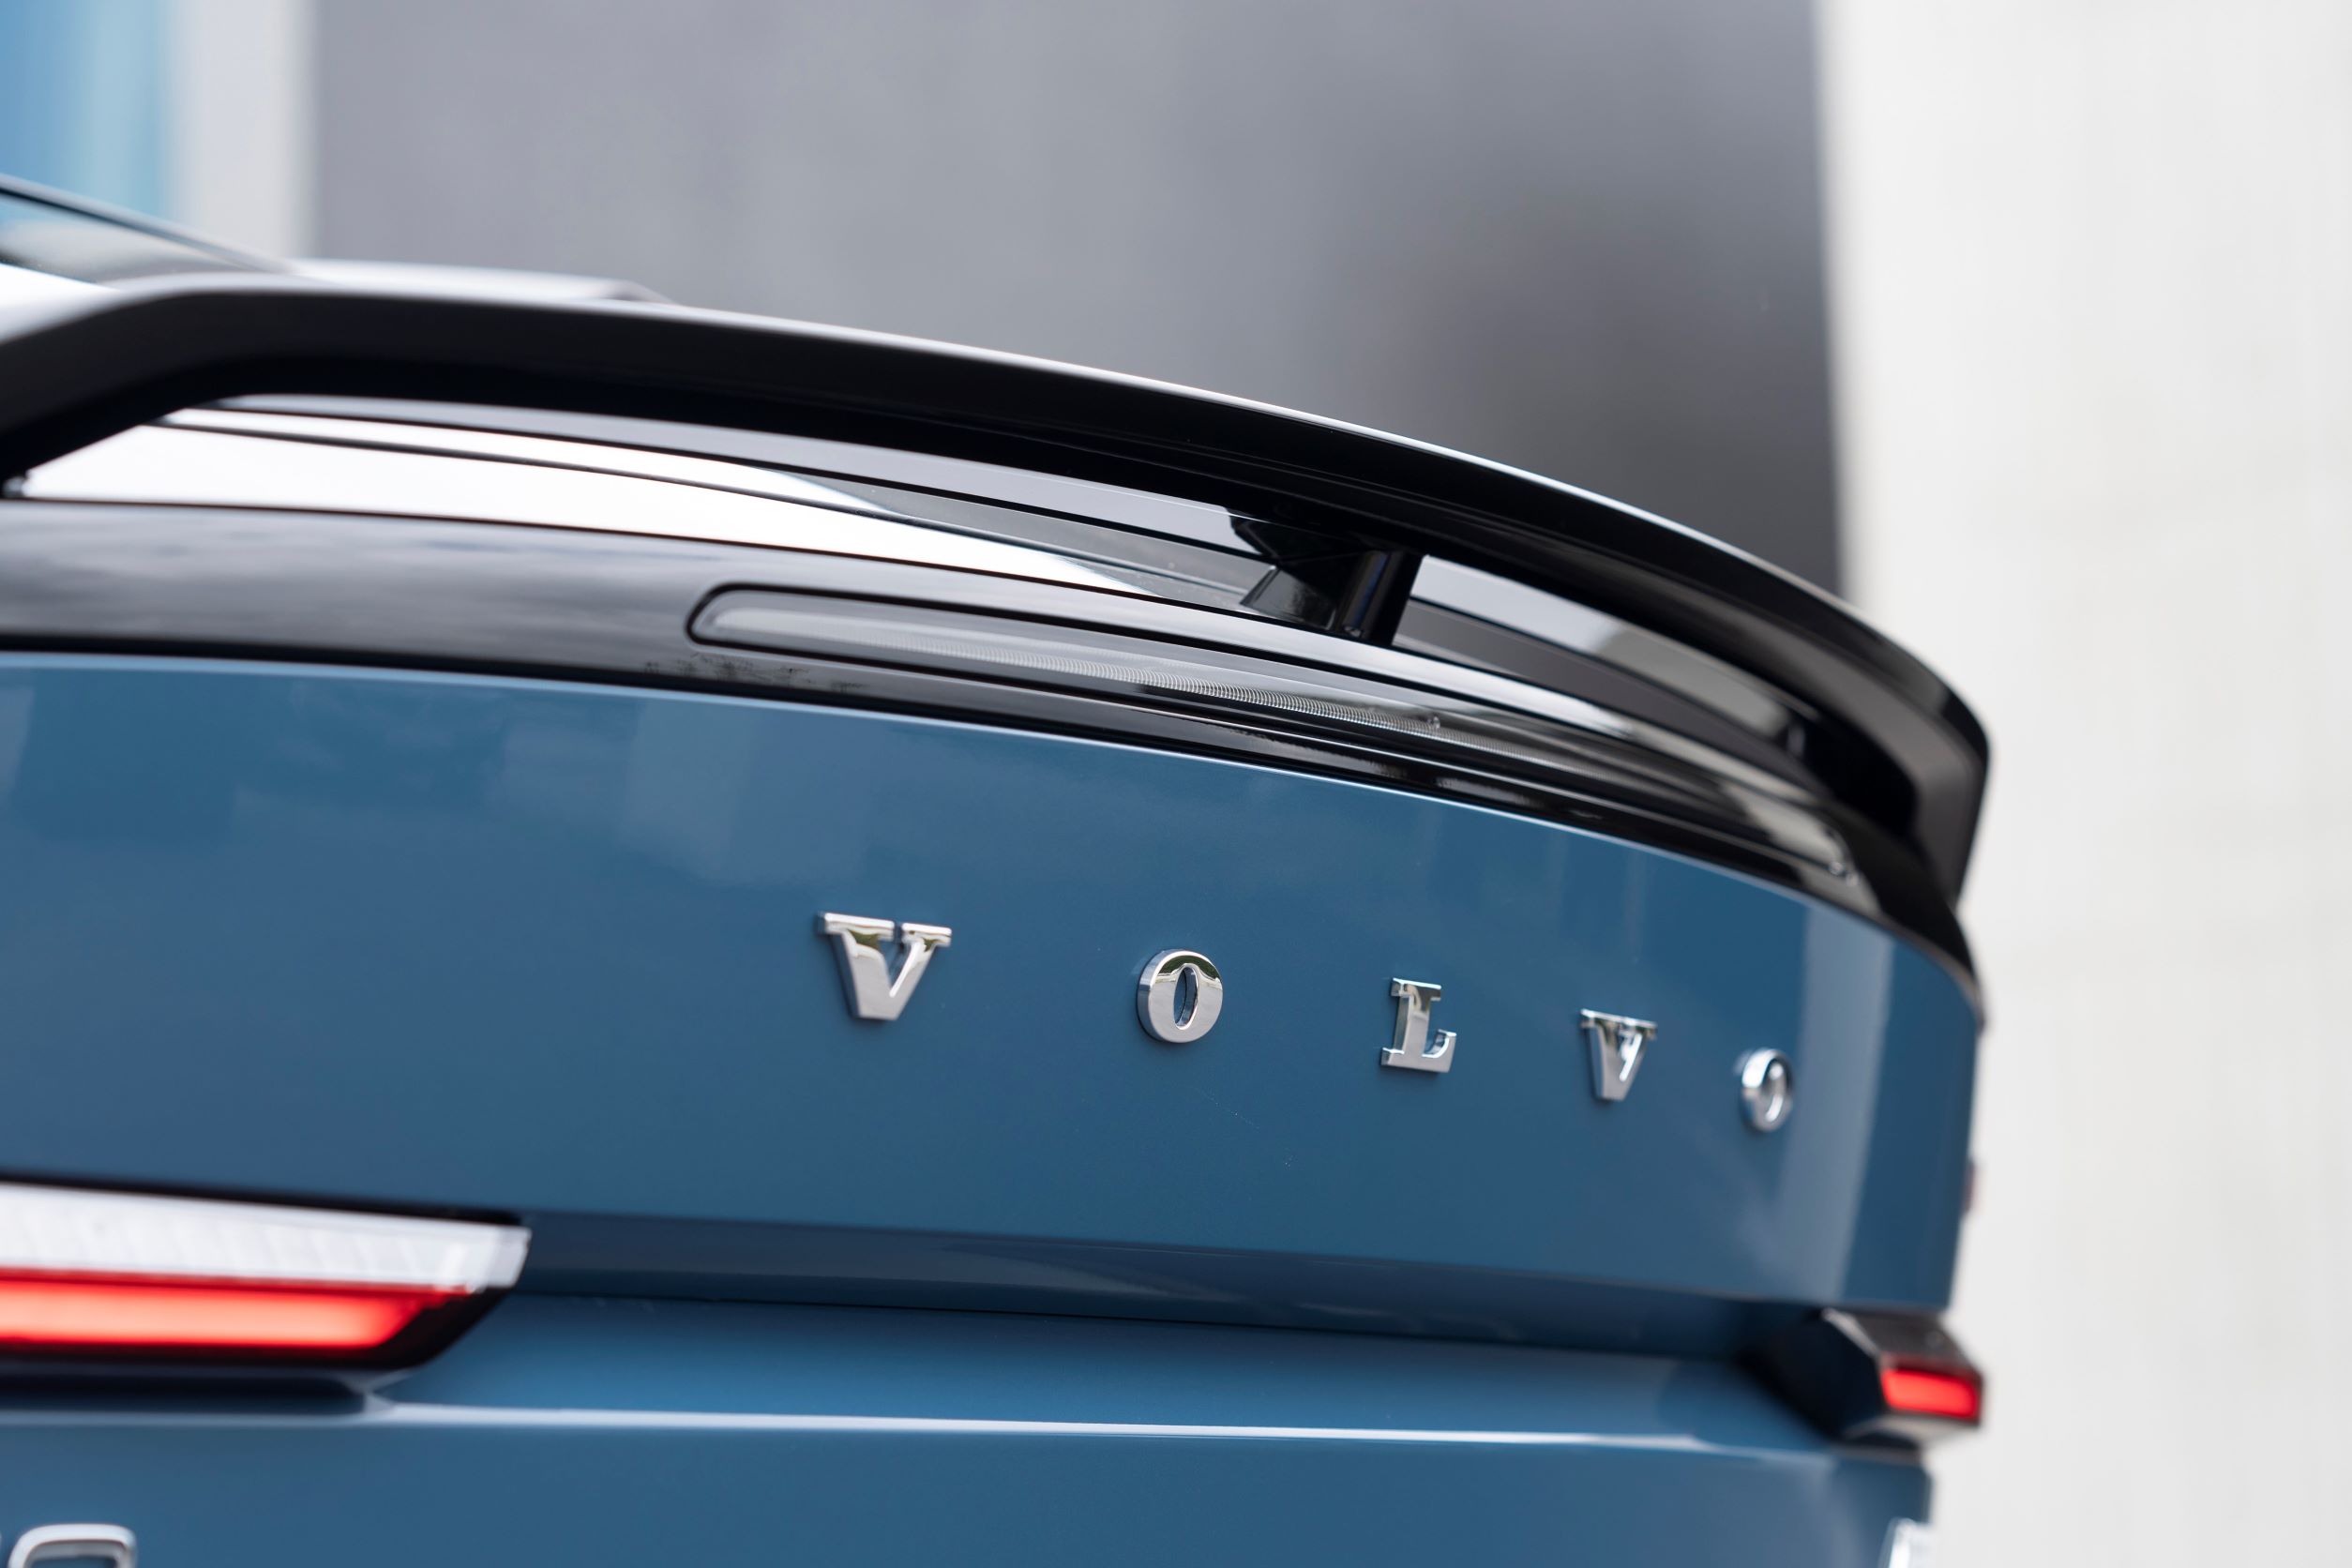 A close-up of the Volvo badge on the rear of the Volvo C40 Recharge.